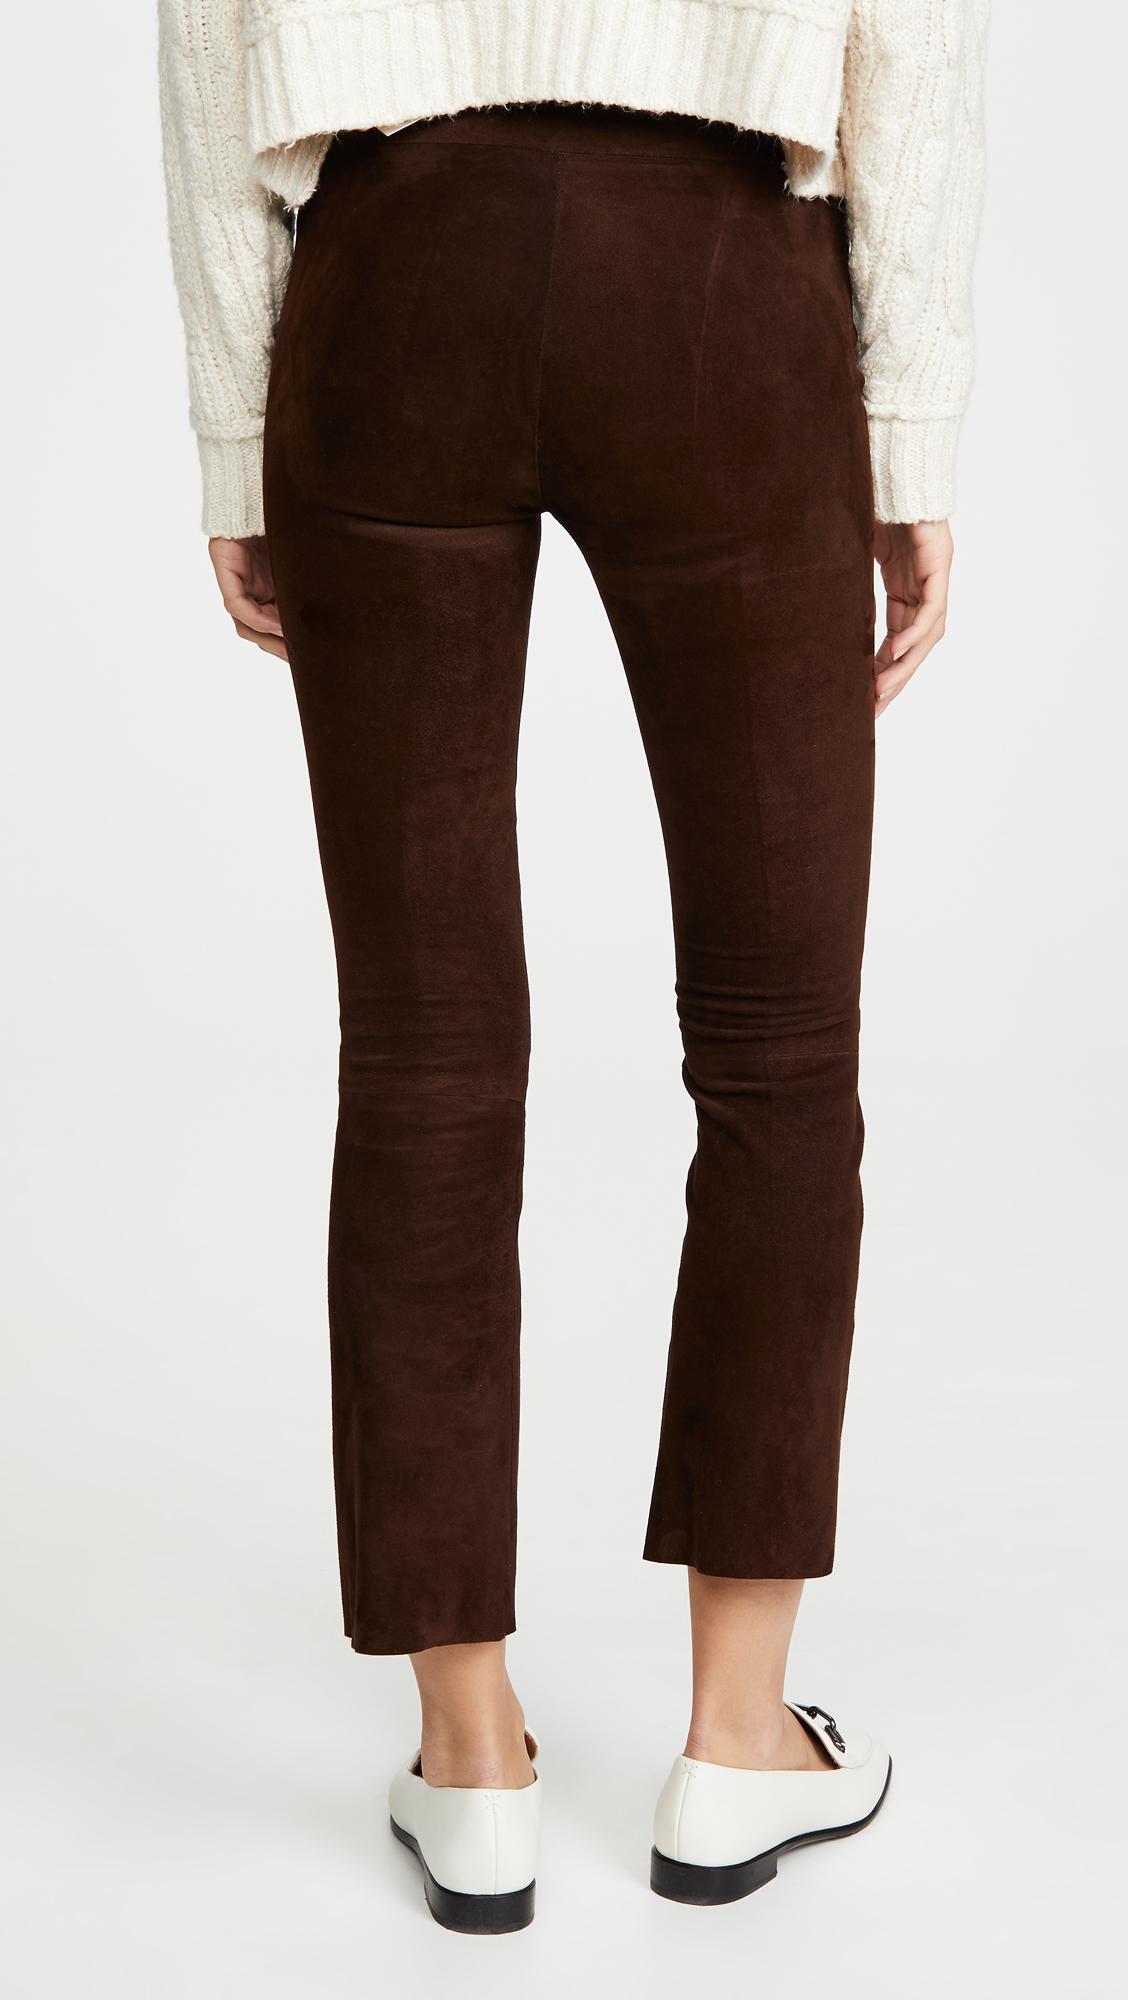 urban outfitters brown flare leggings depot